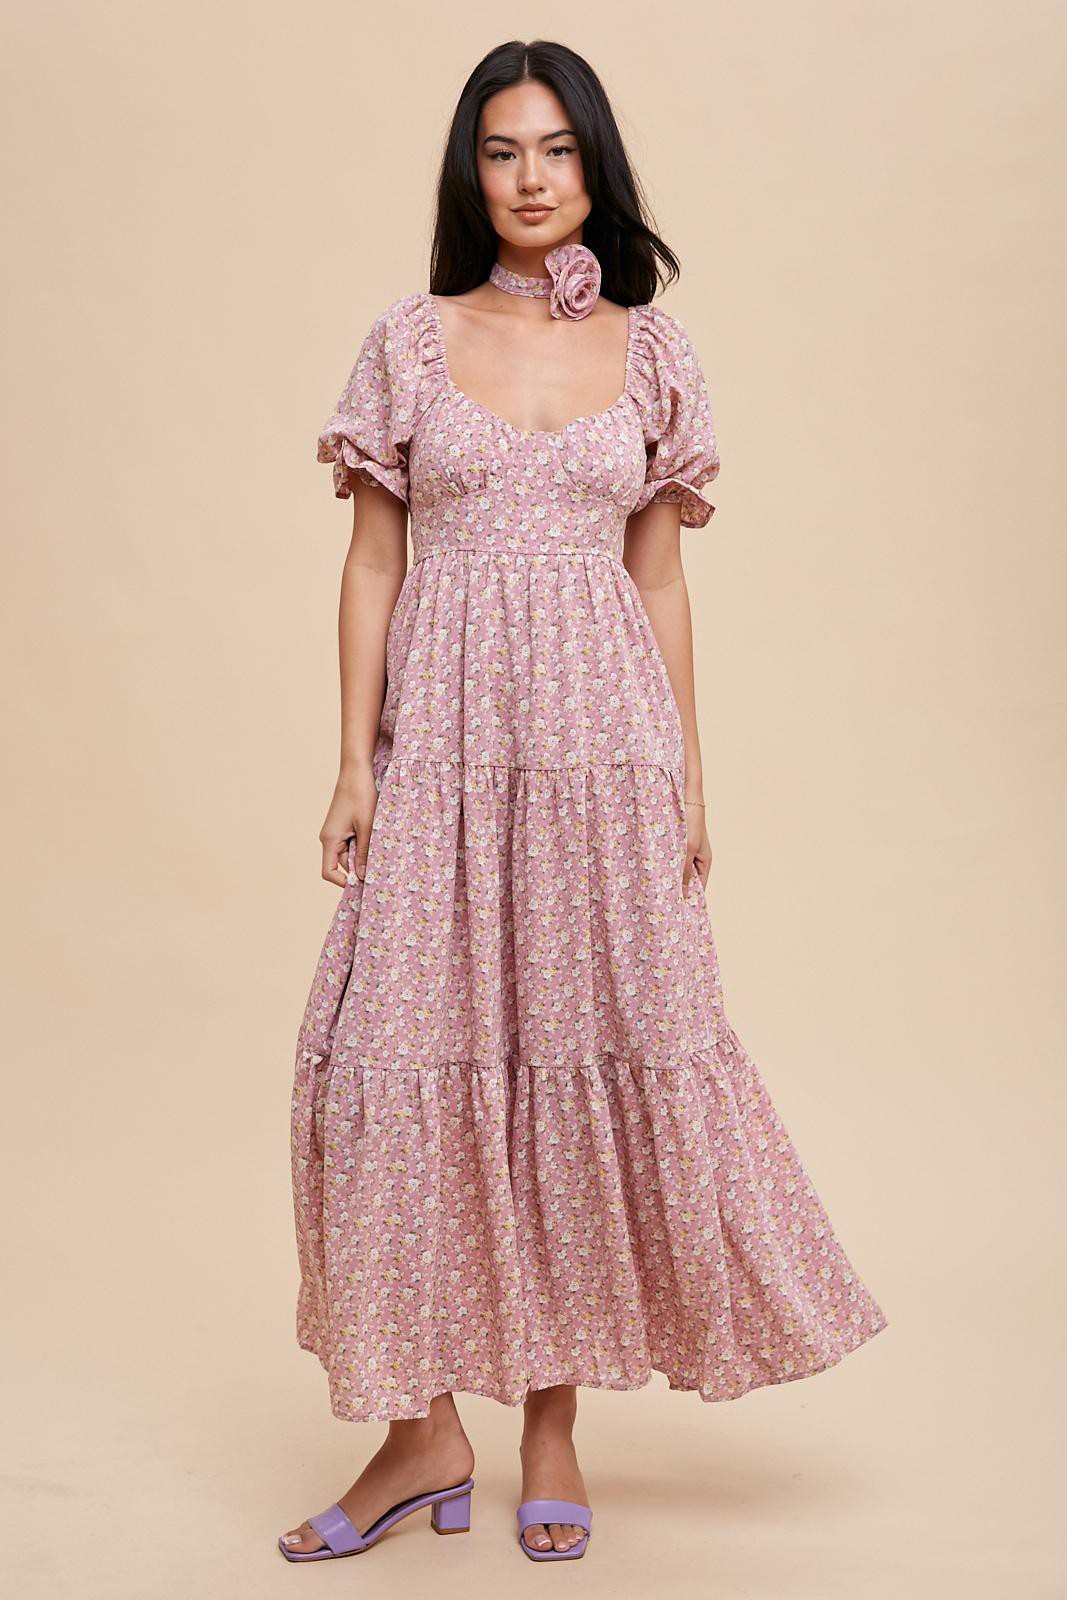 ROSETTE SWEETHEART NECK FLORAL TIERED DRESS